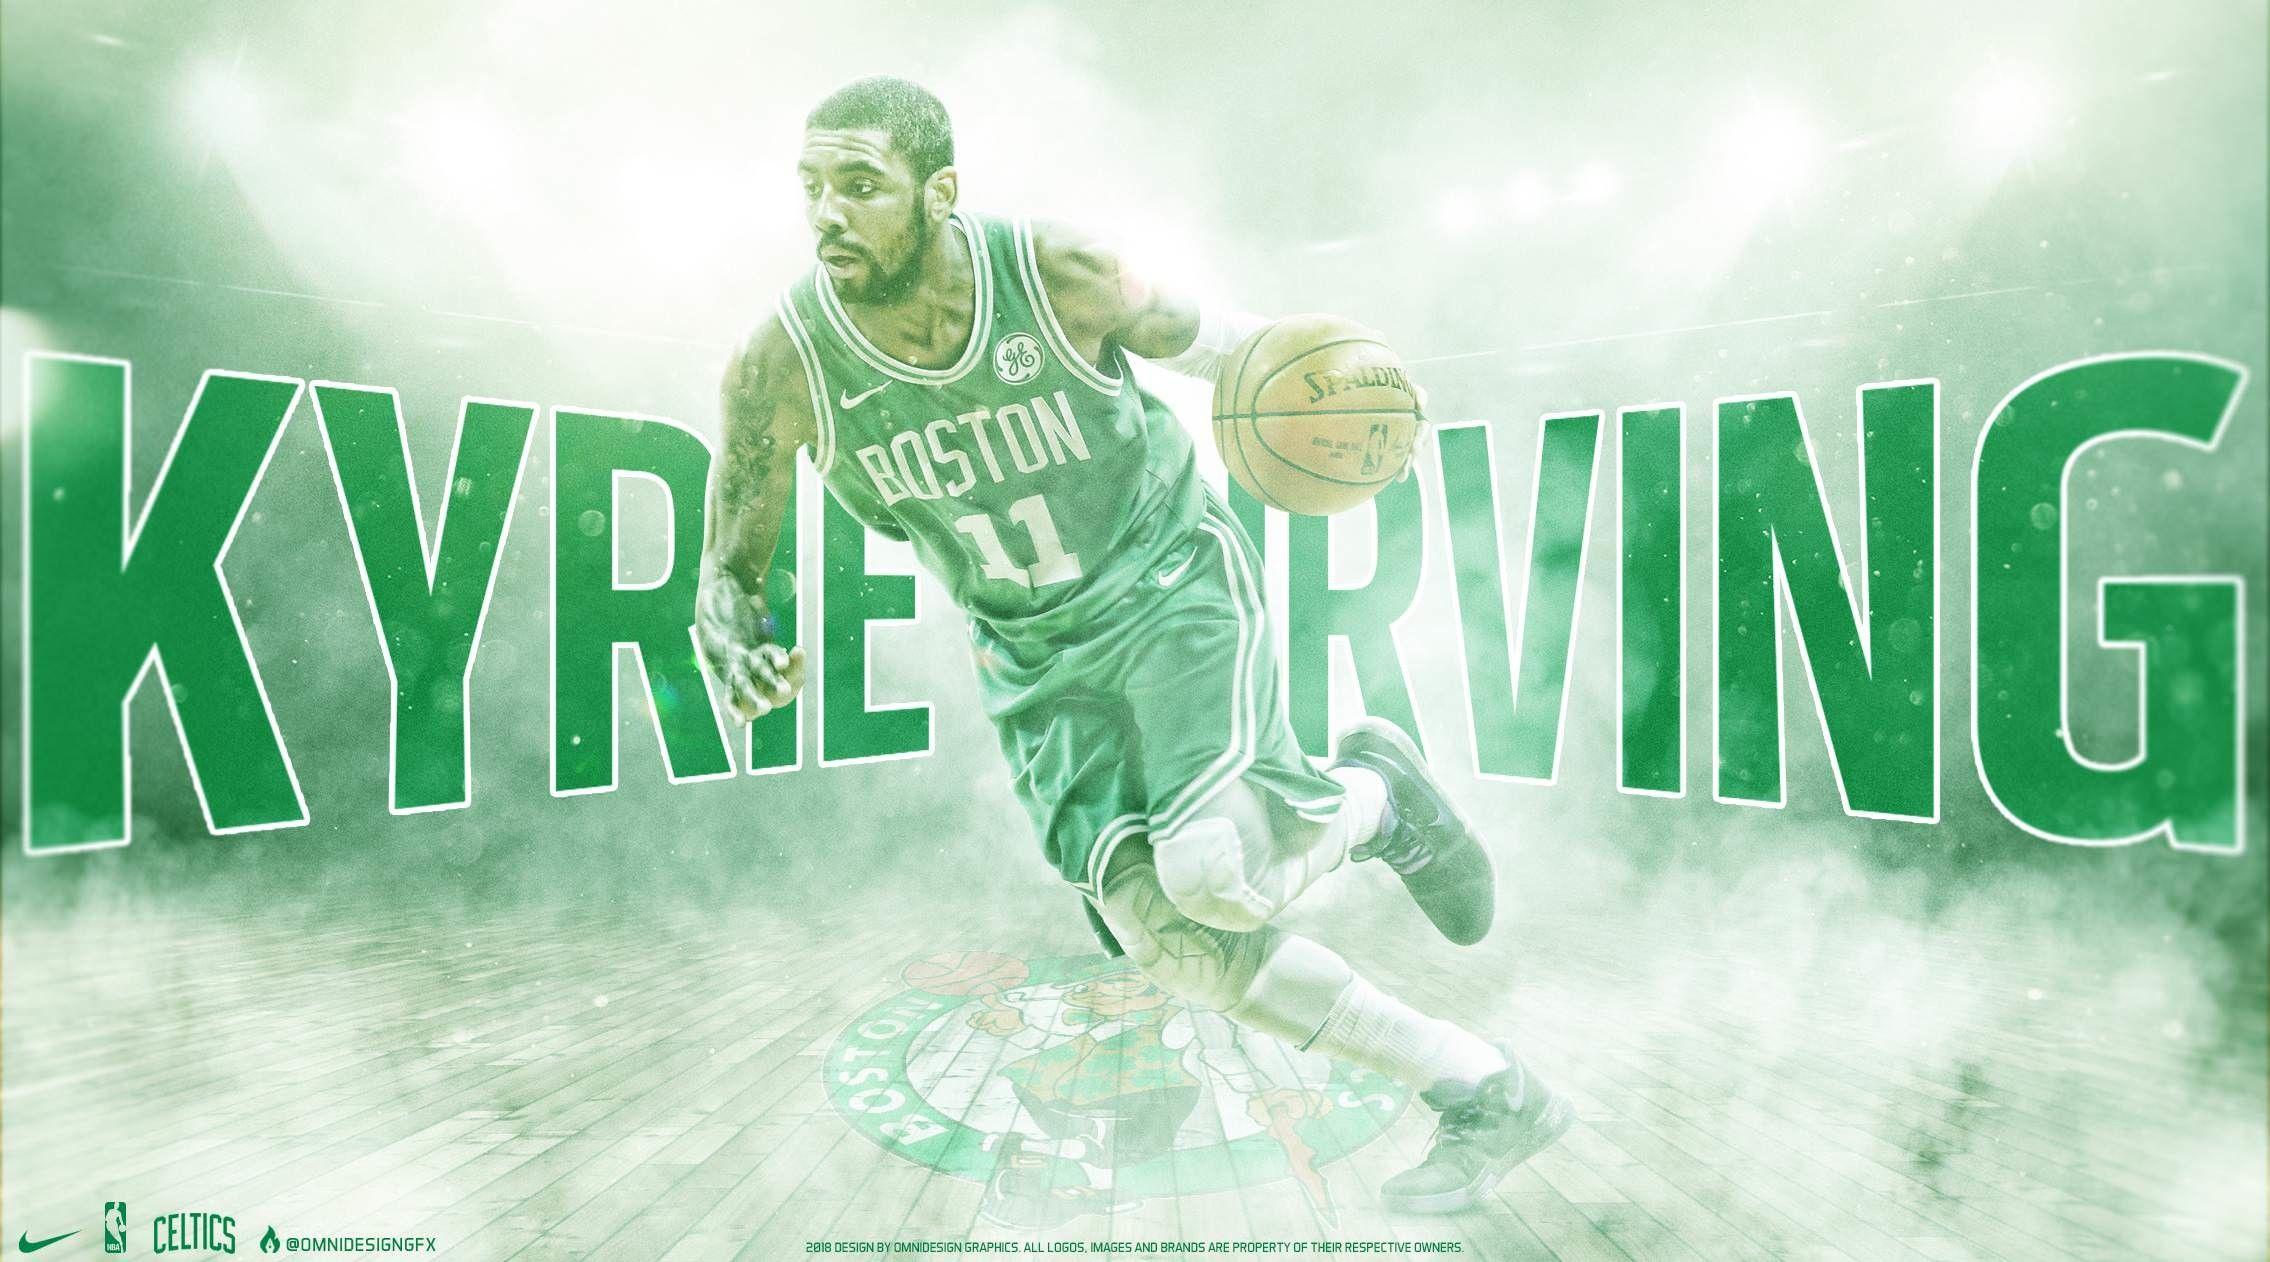 Kyrie Irving Wallpaper background picture